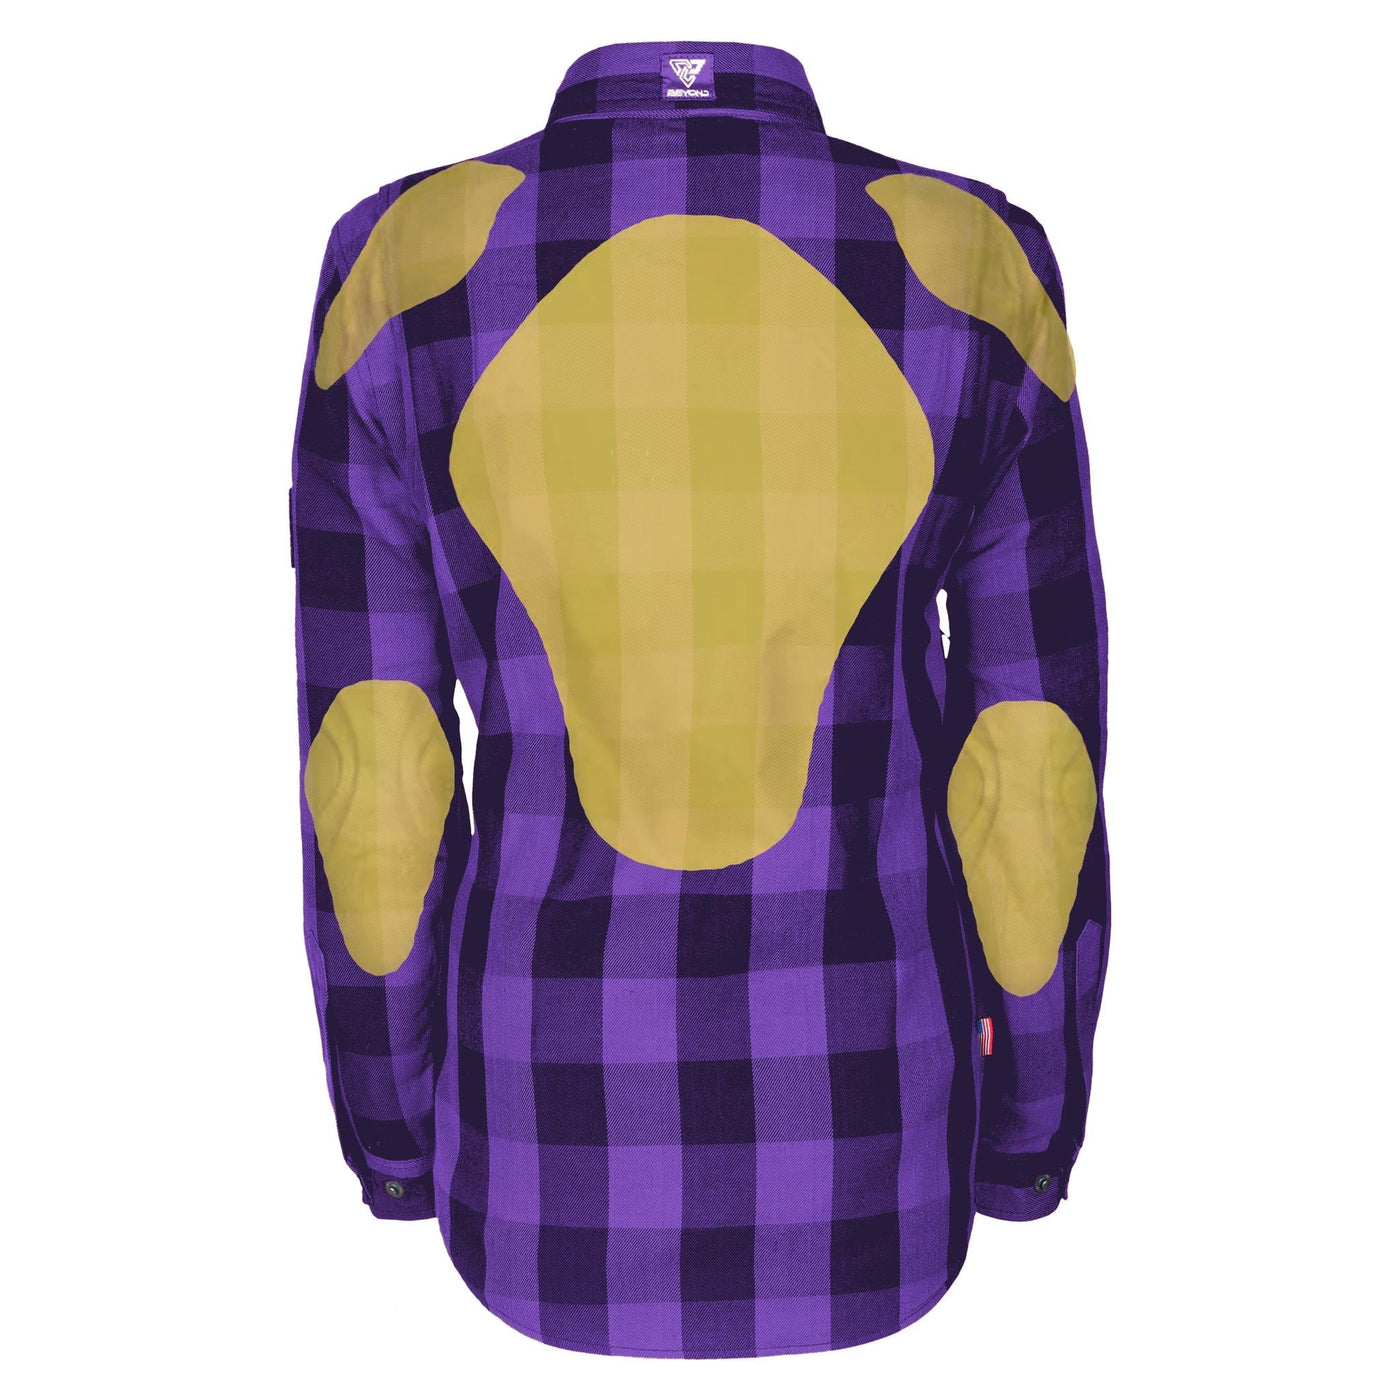 Protective Flannel Shirt with Pads for Women - Purple Checkered